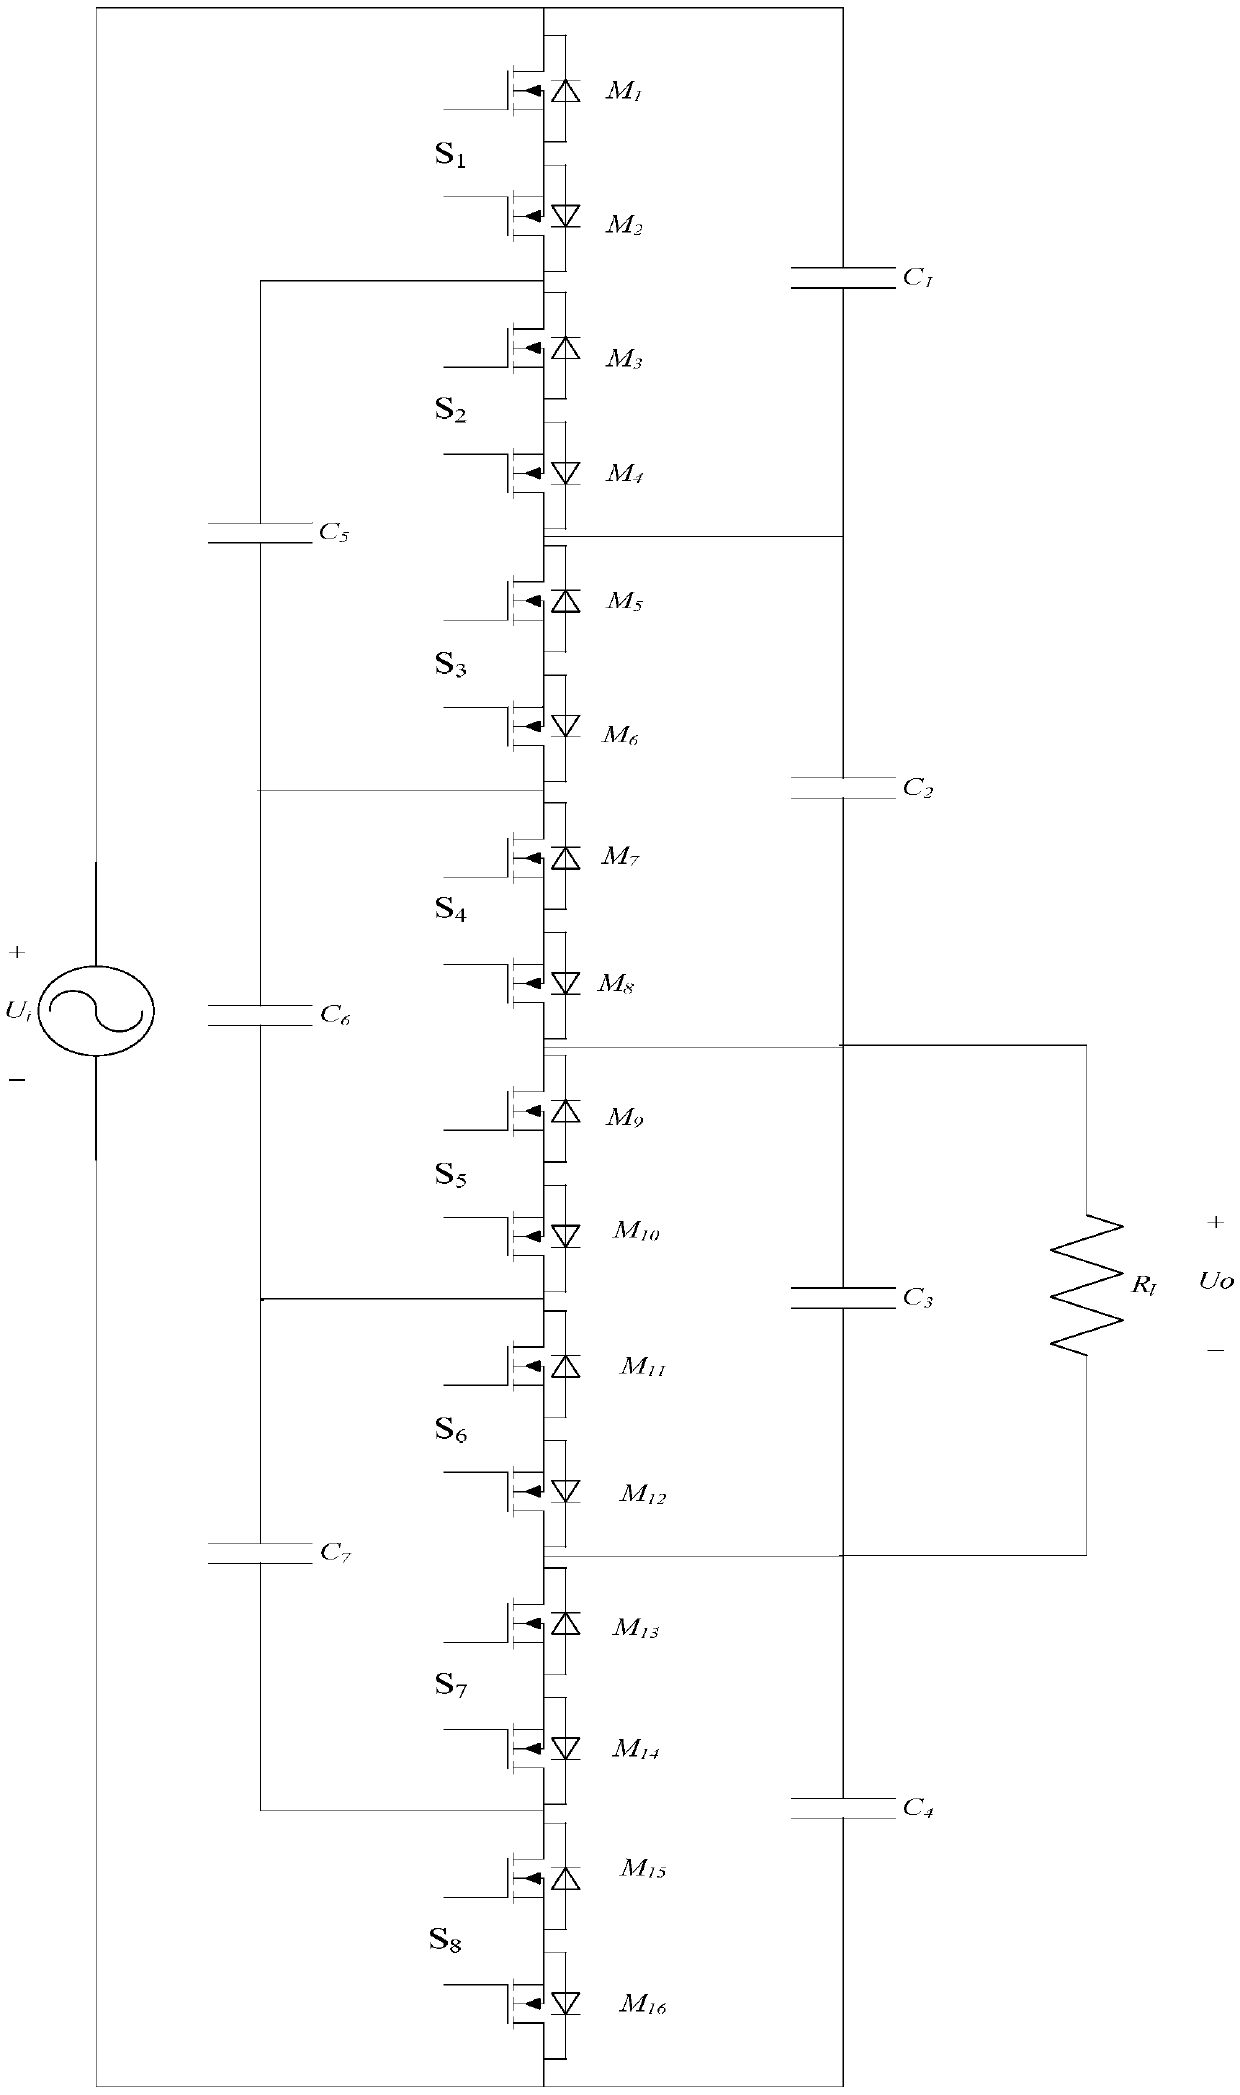 Switching switched capacitor ac-ac converter with fixed ratio 1/4 or 4